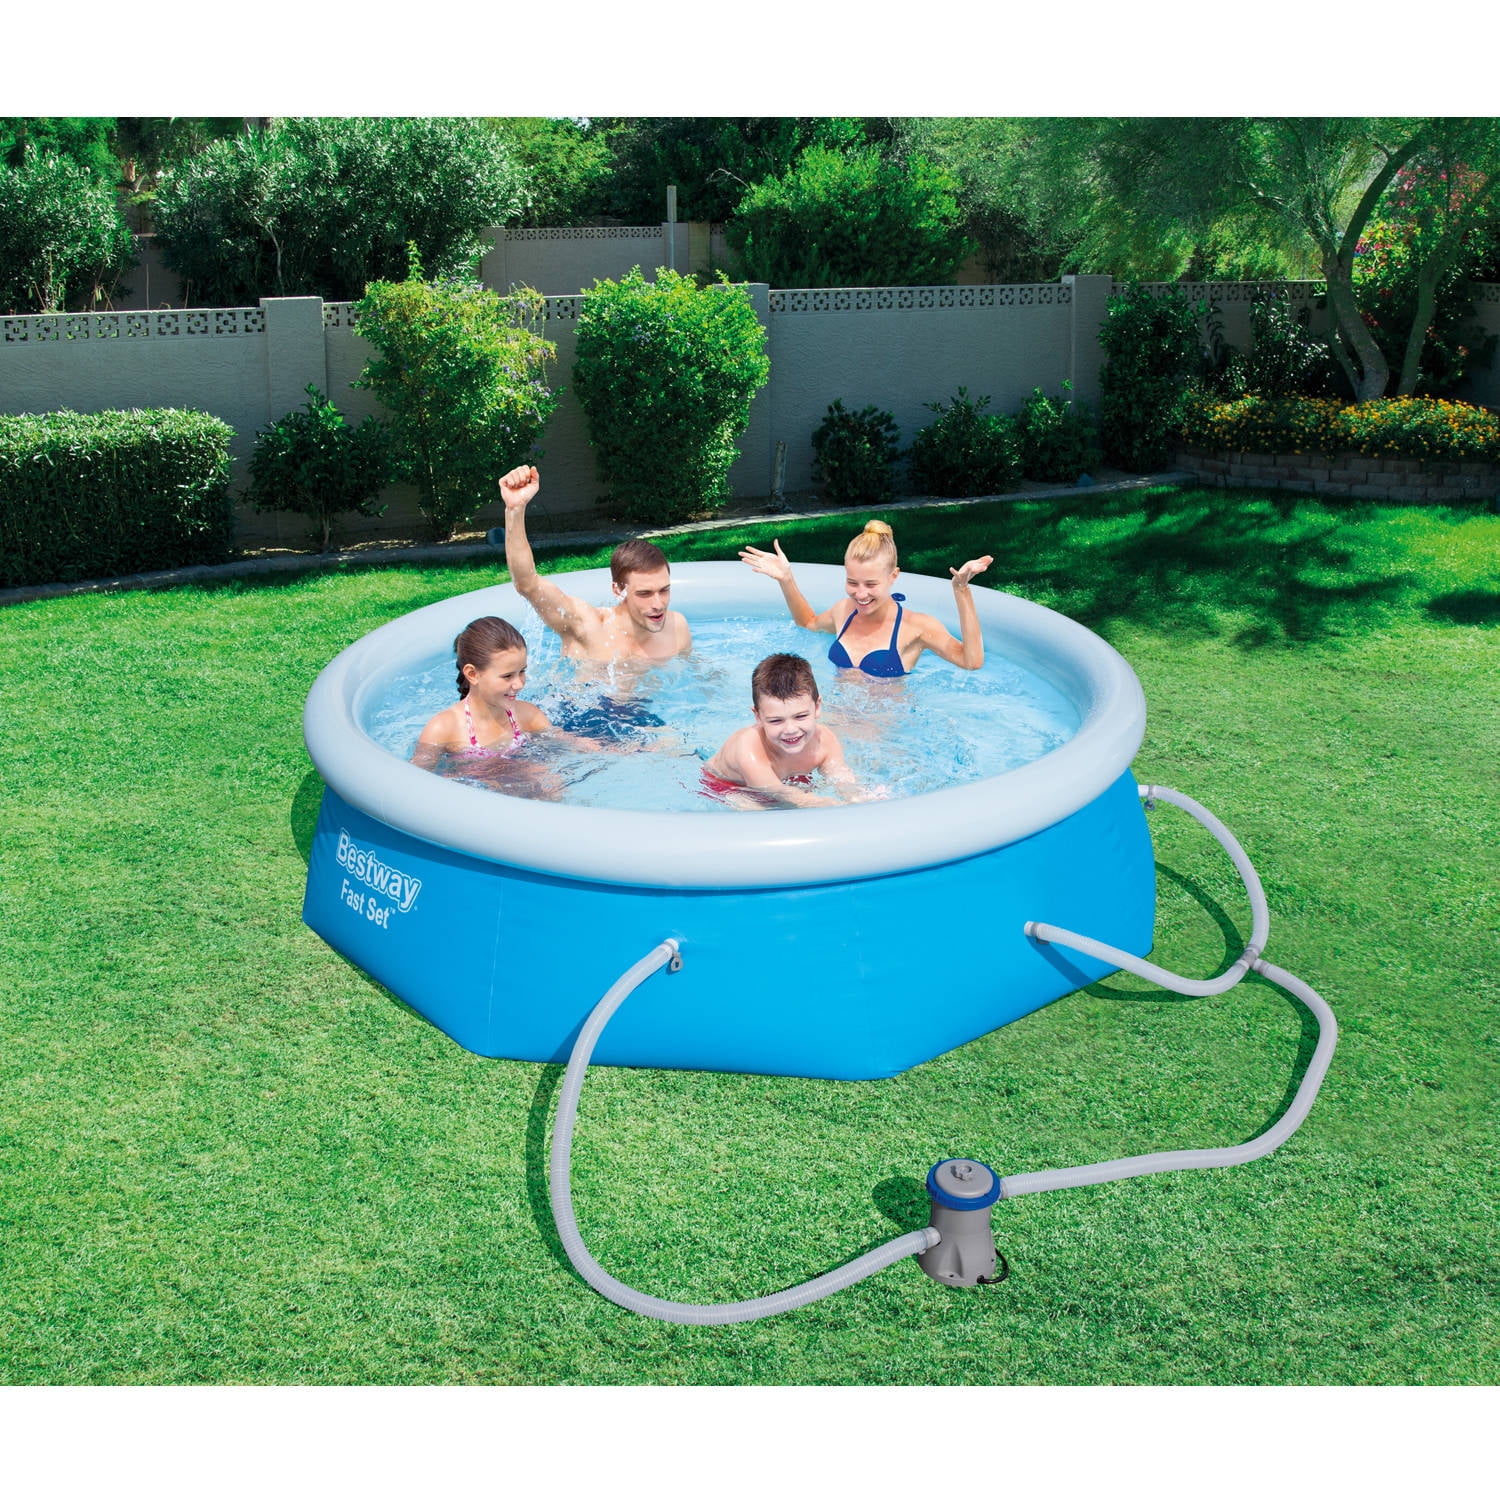 Bestway Fast Set Swimming Pool Set with Pump, Ladder and Cover (Multiple Sizes)